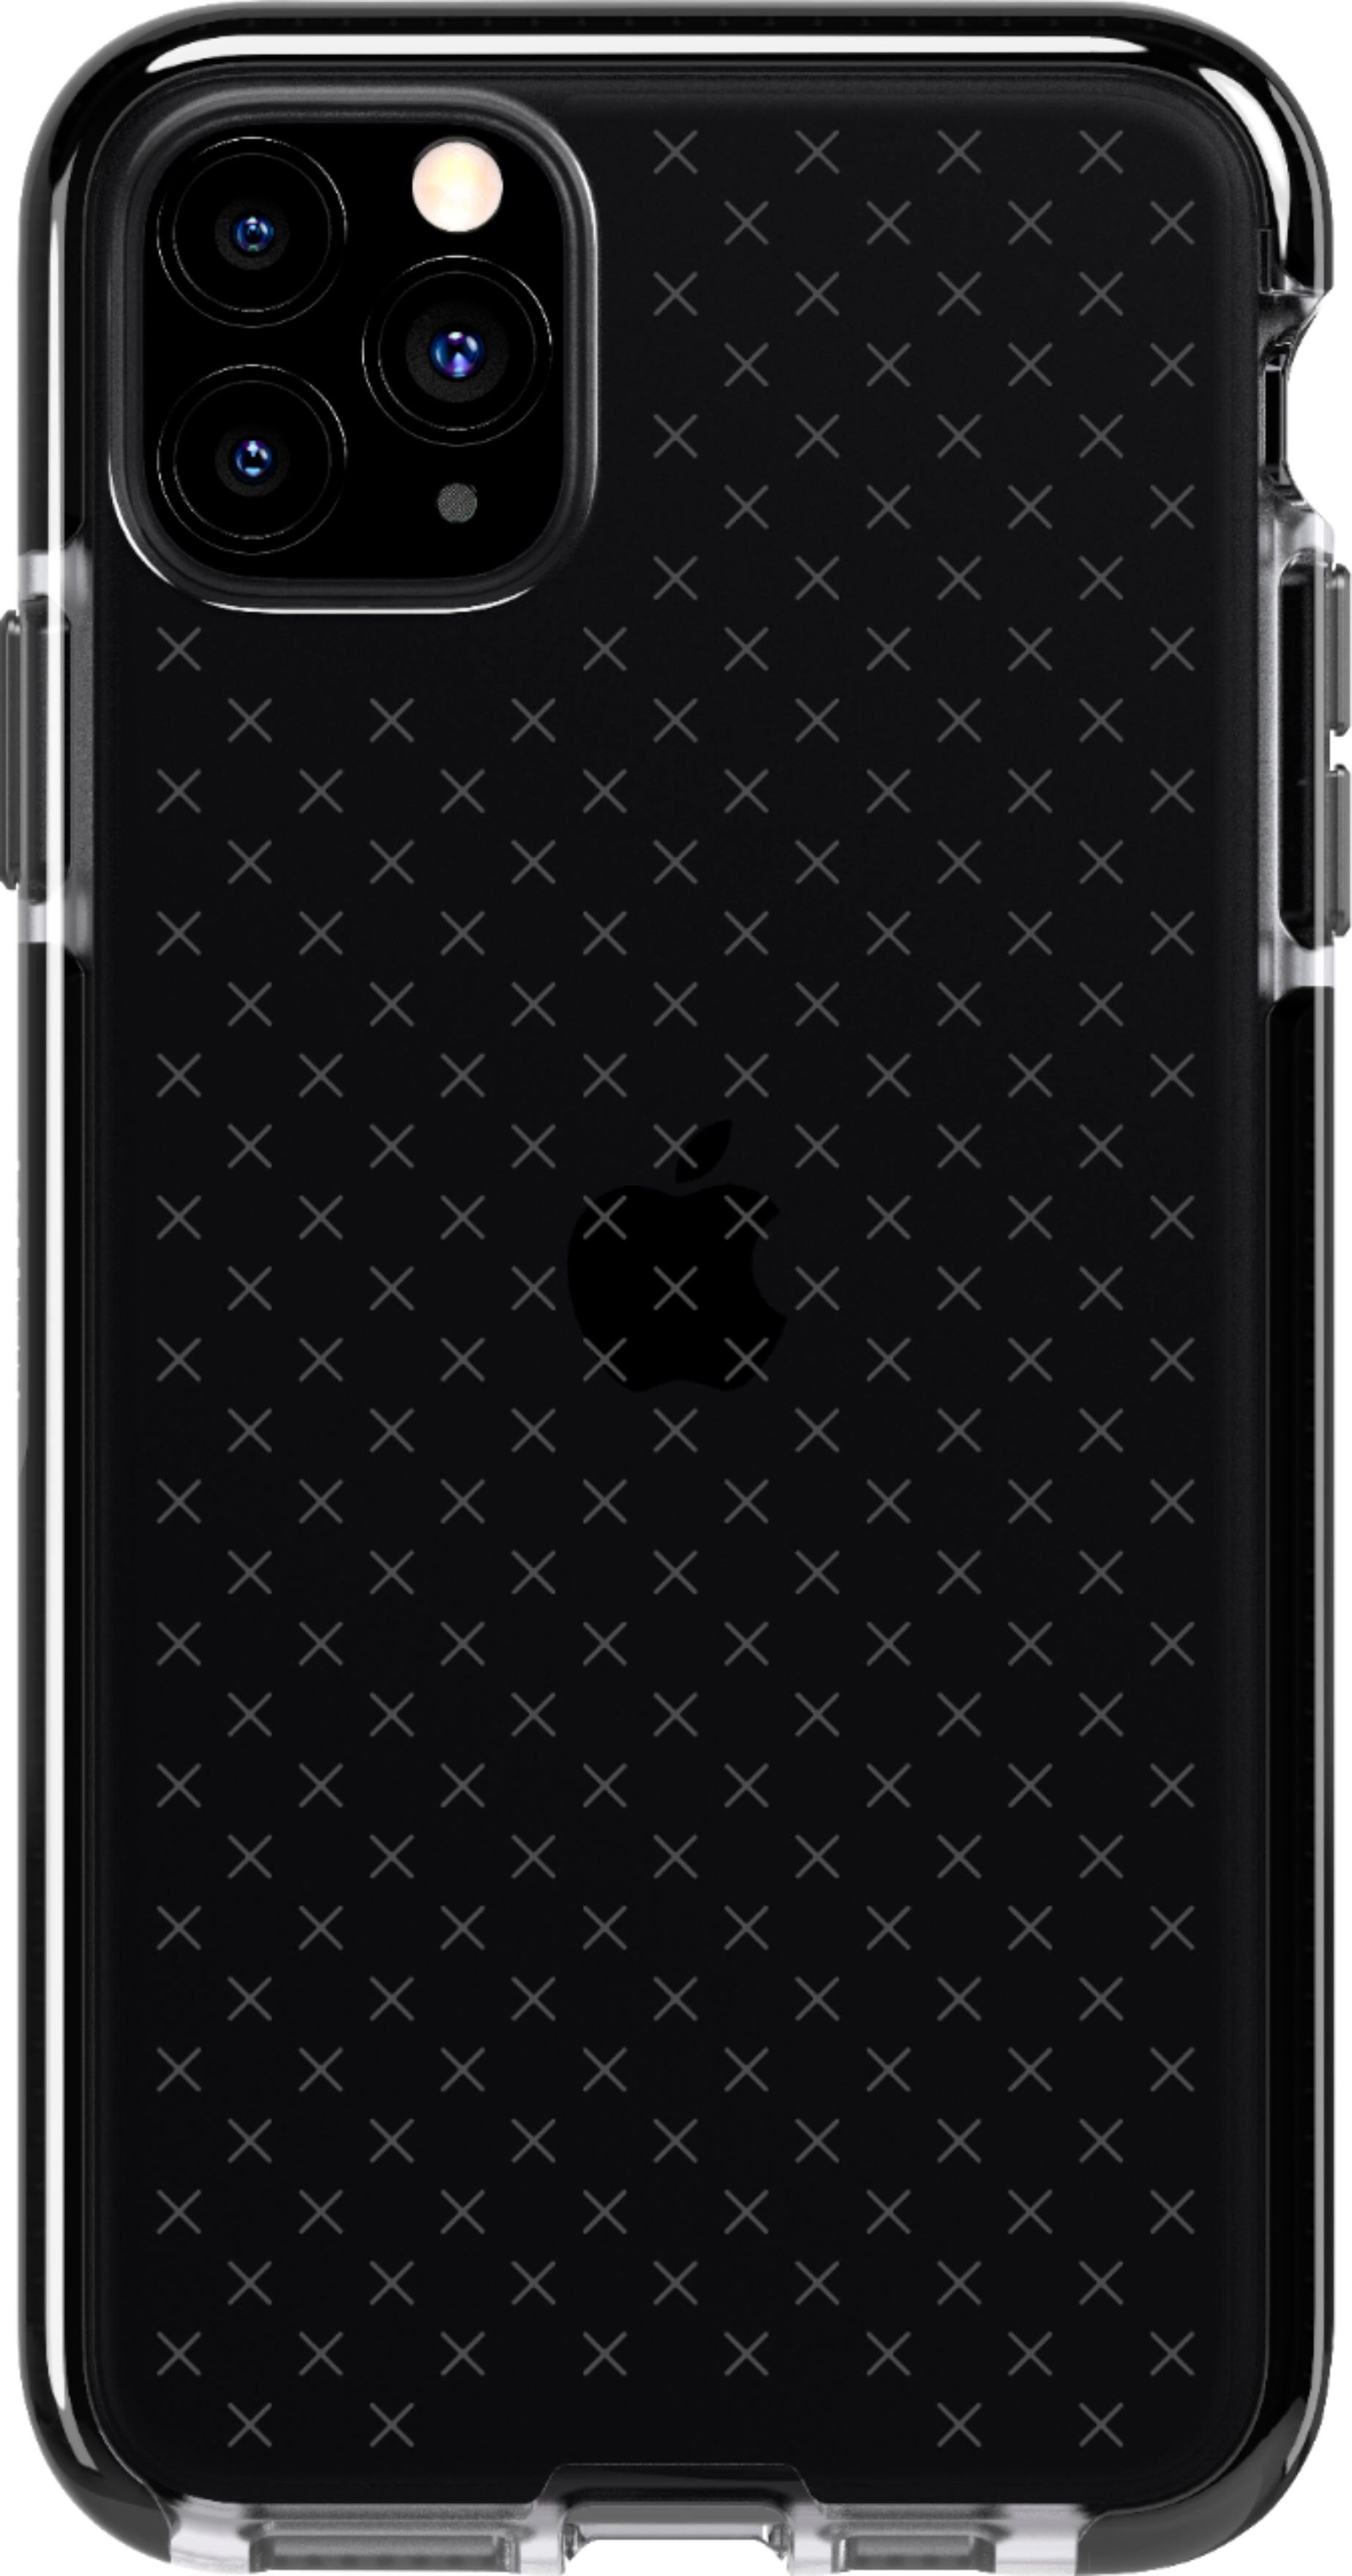 Tech21 Evo Check Case For Apple Iphone 11 Pro Max Smokey Black bbr Best Buy